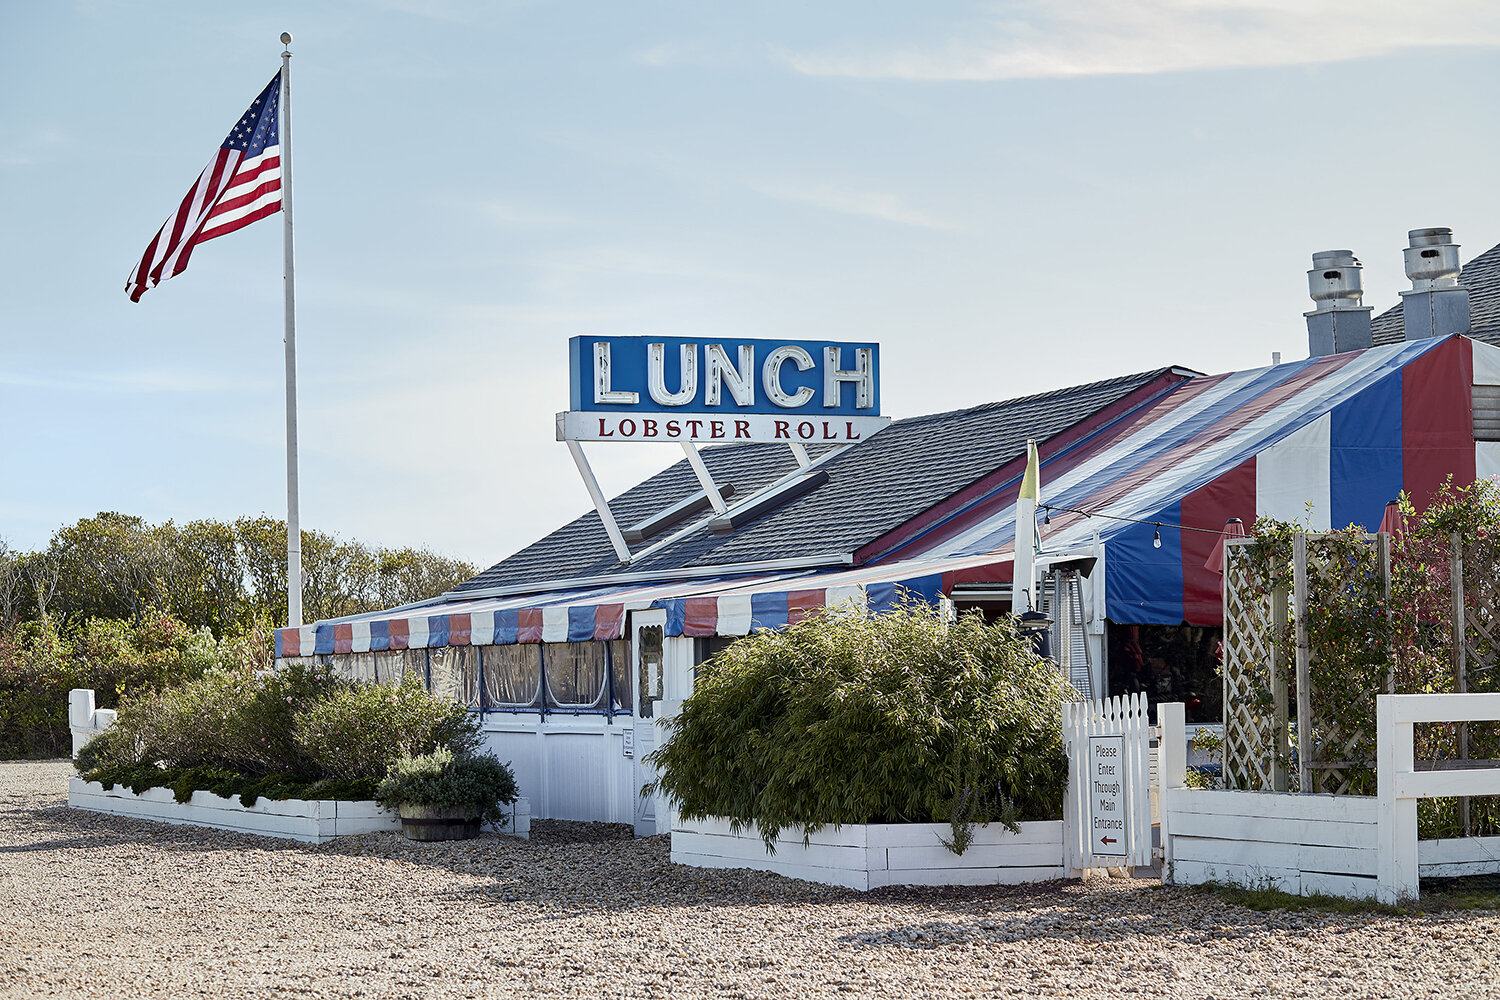 The Lobster Roll "Lunch" Restaurant, 2017